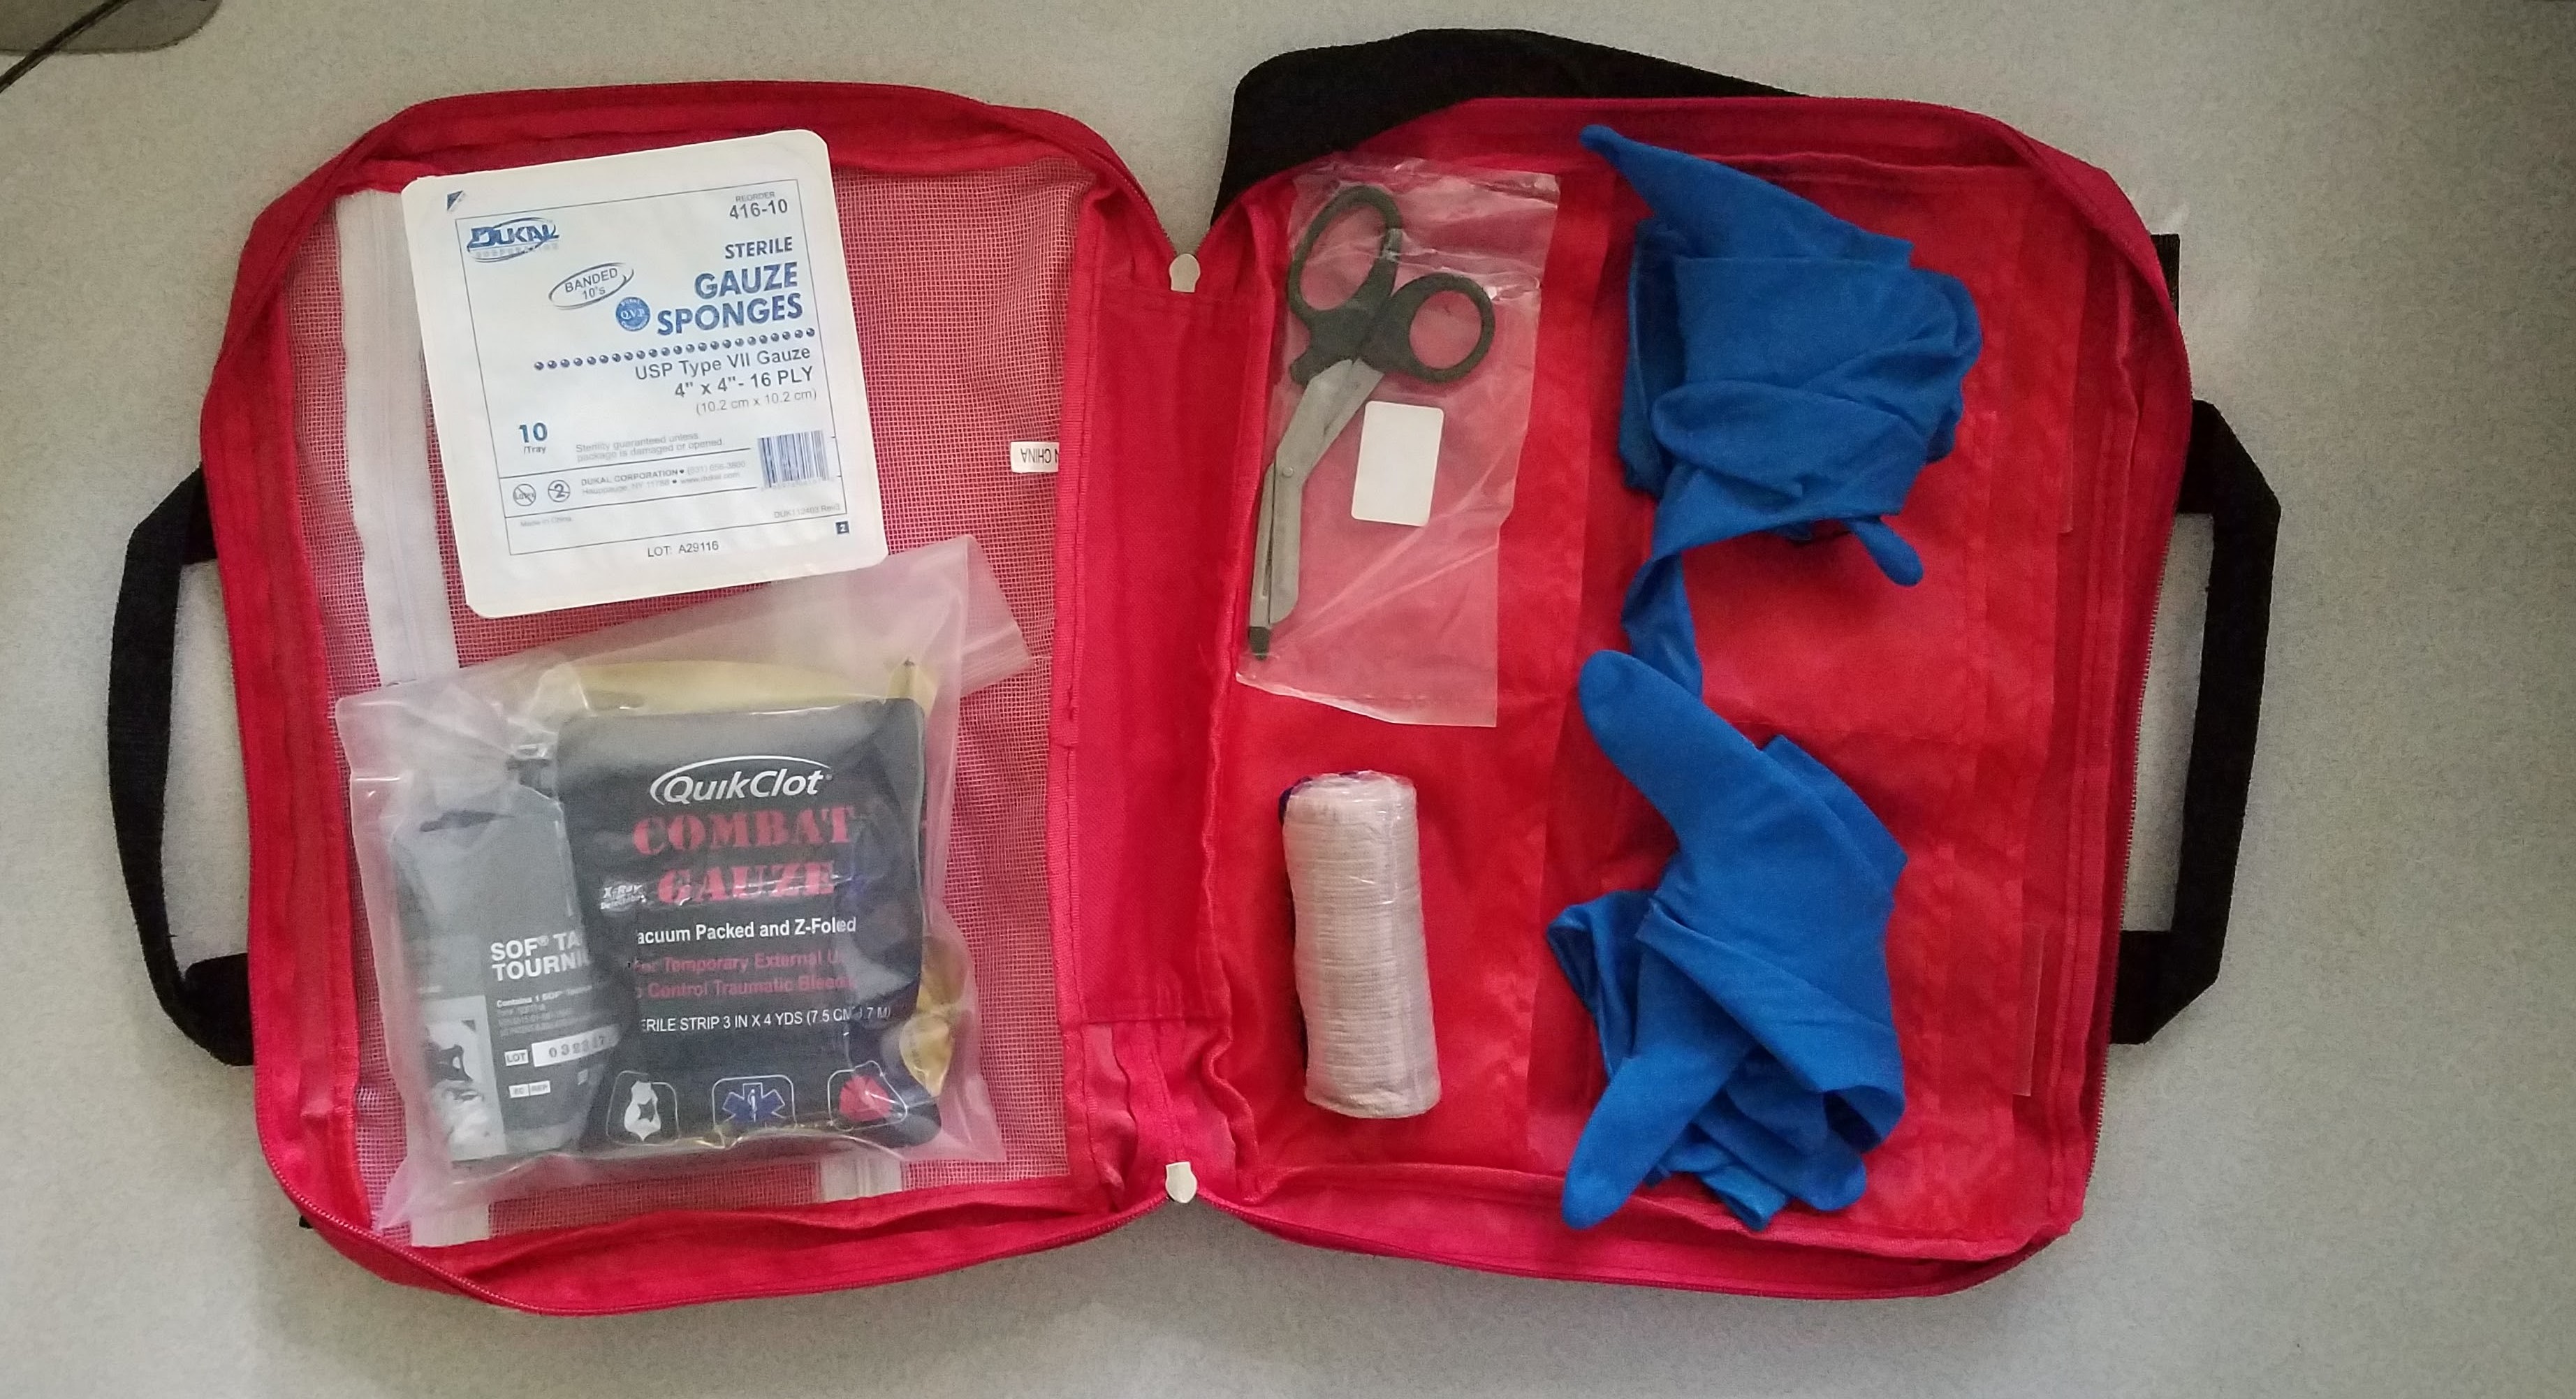 Stop the bleed kit opened showing gauze, sponges, scissors, and gloves